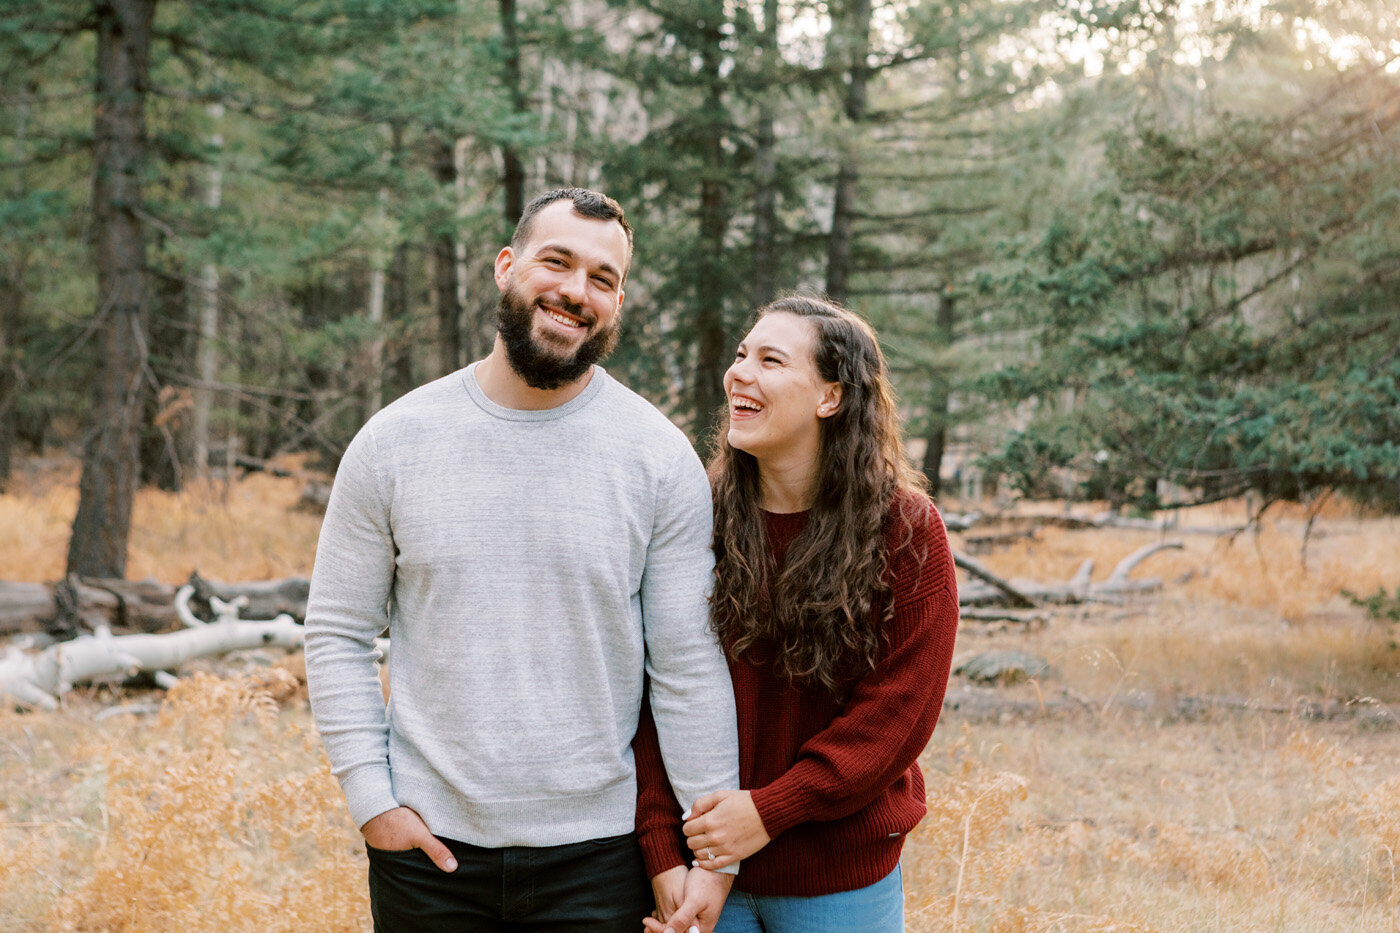 Southern California Engagement photographer - Bethany Brown 11